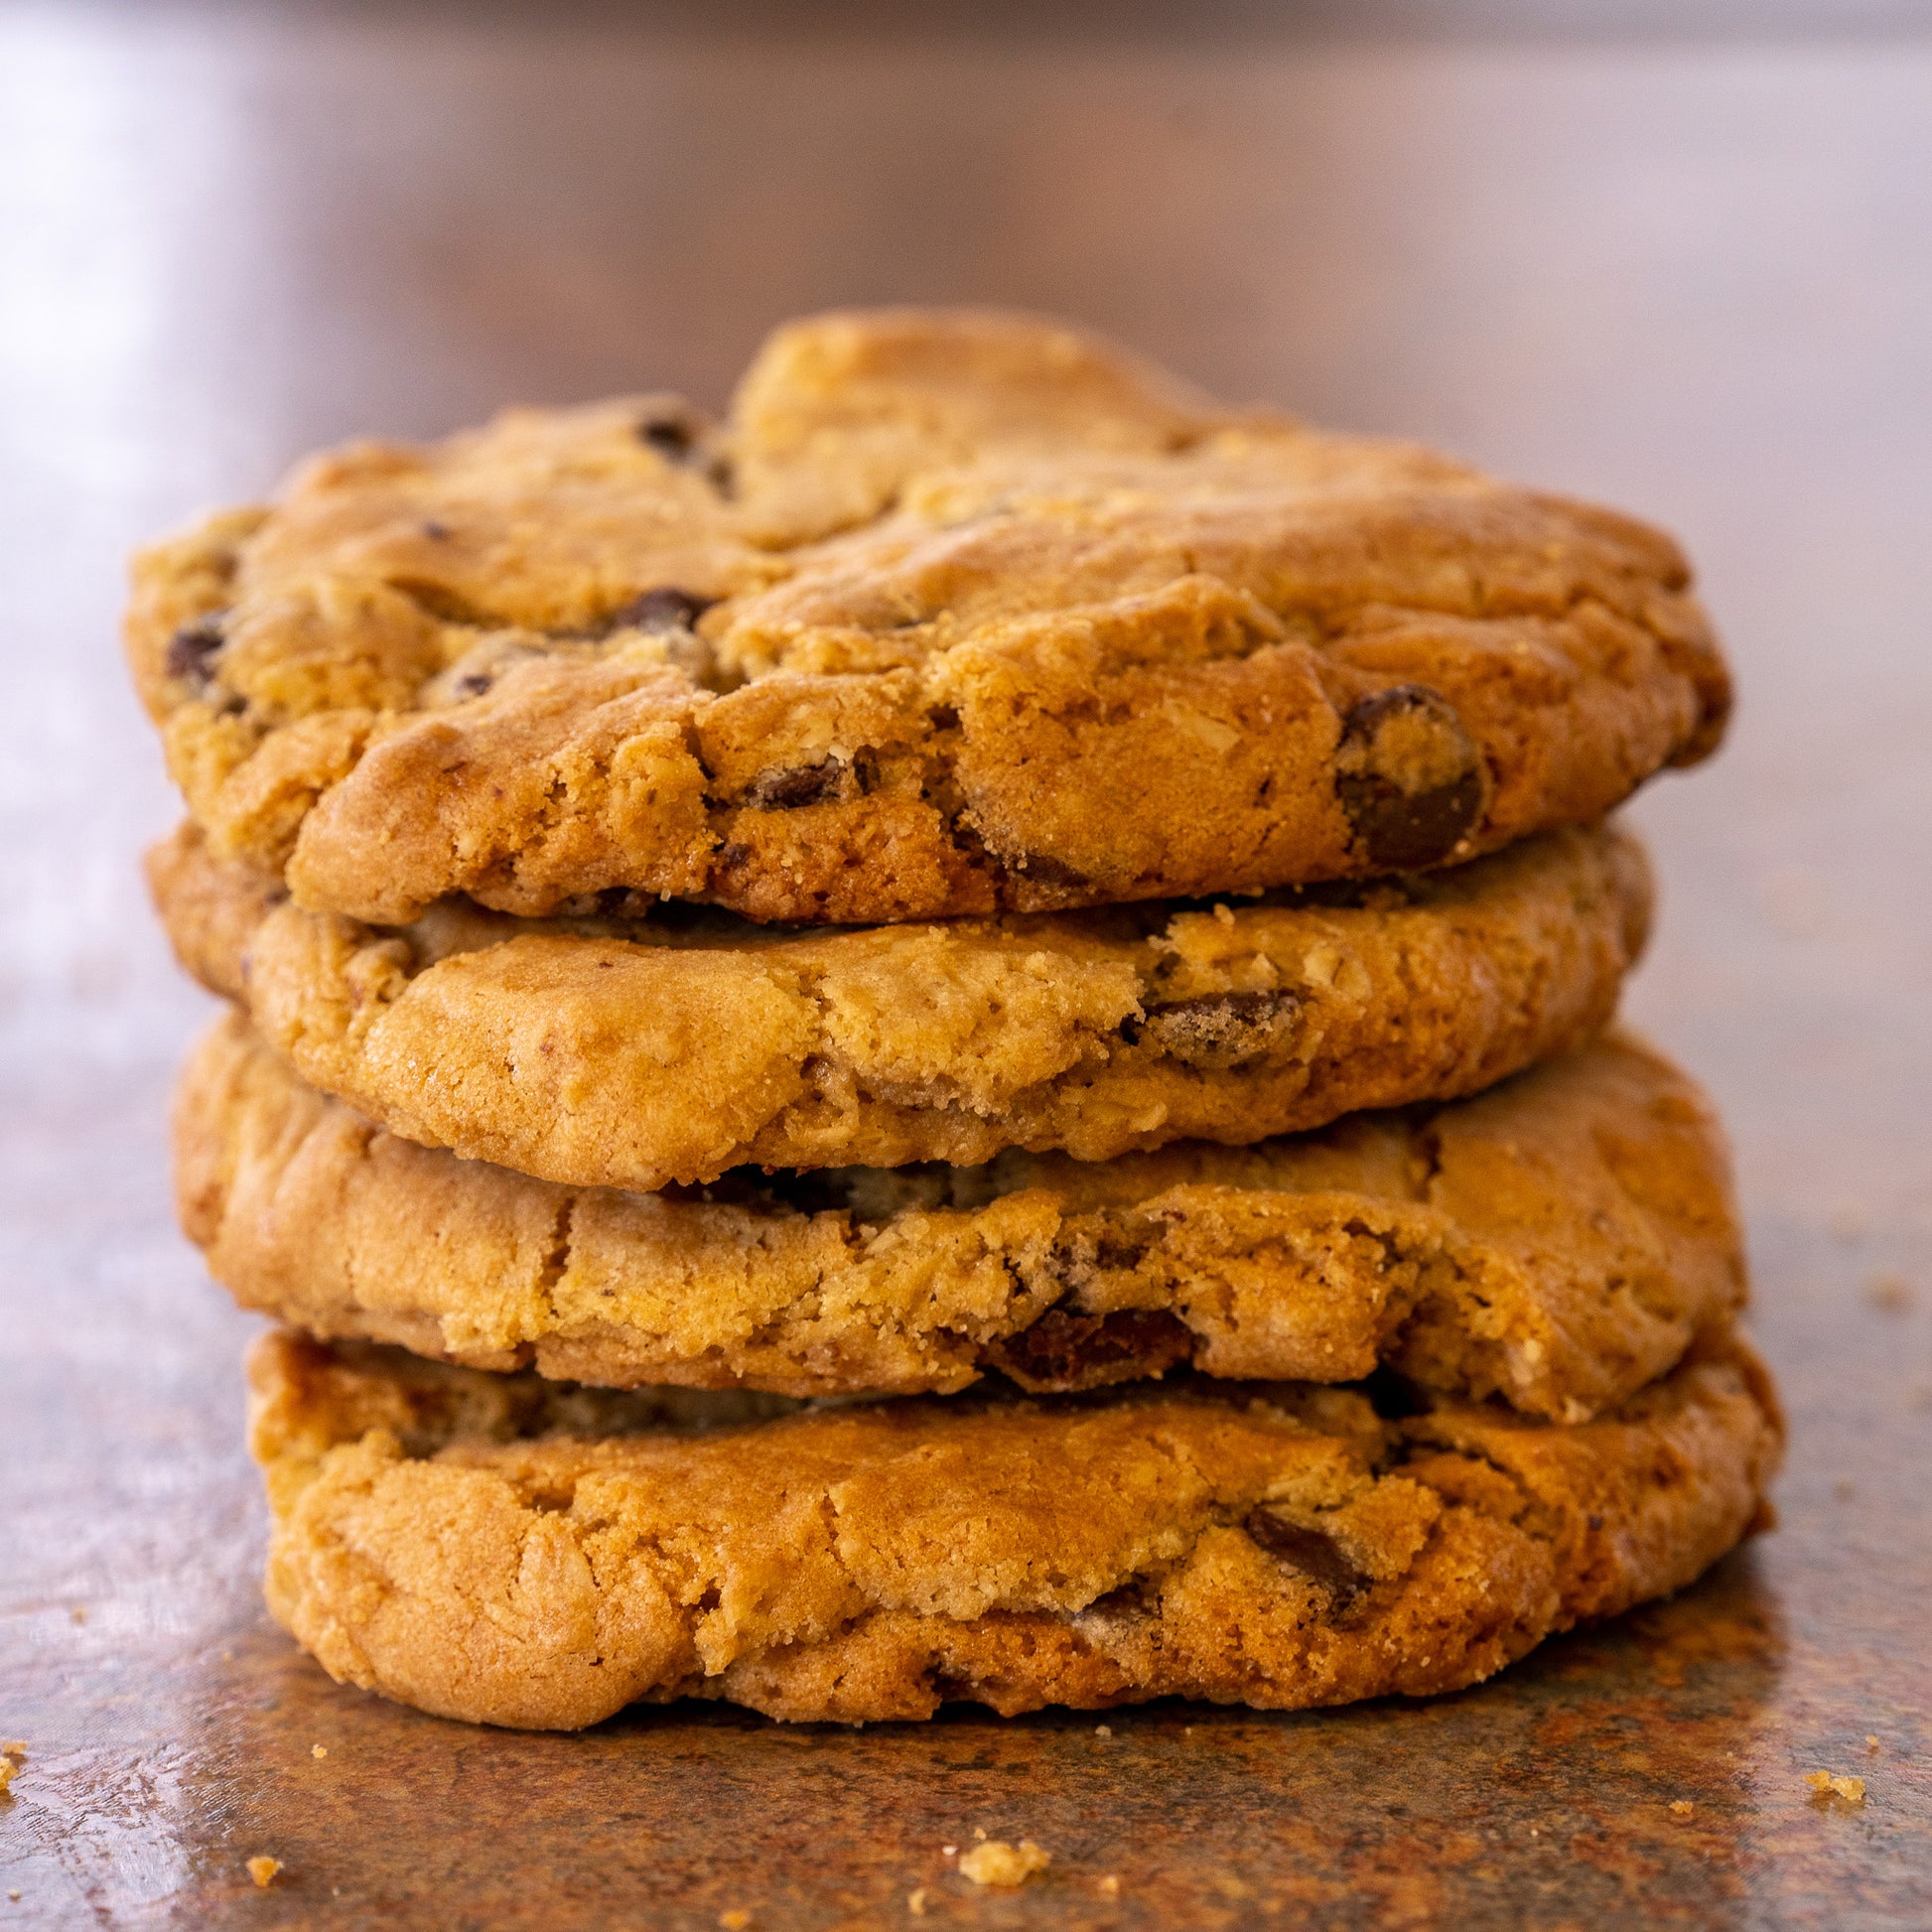 Chocolate Chip Oatmeal Cookie 4 pack